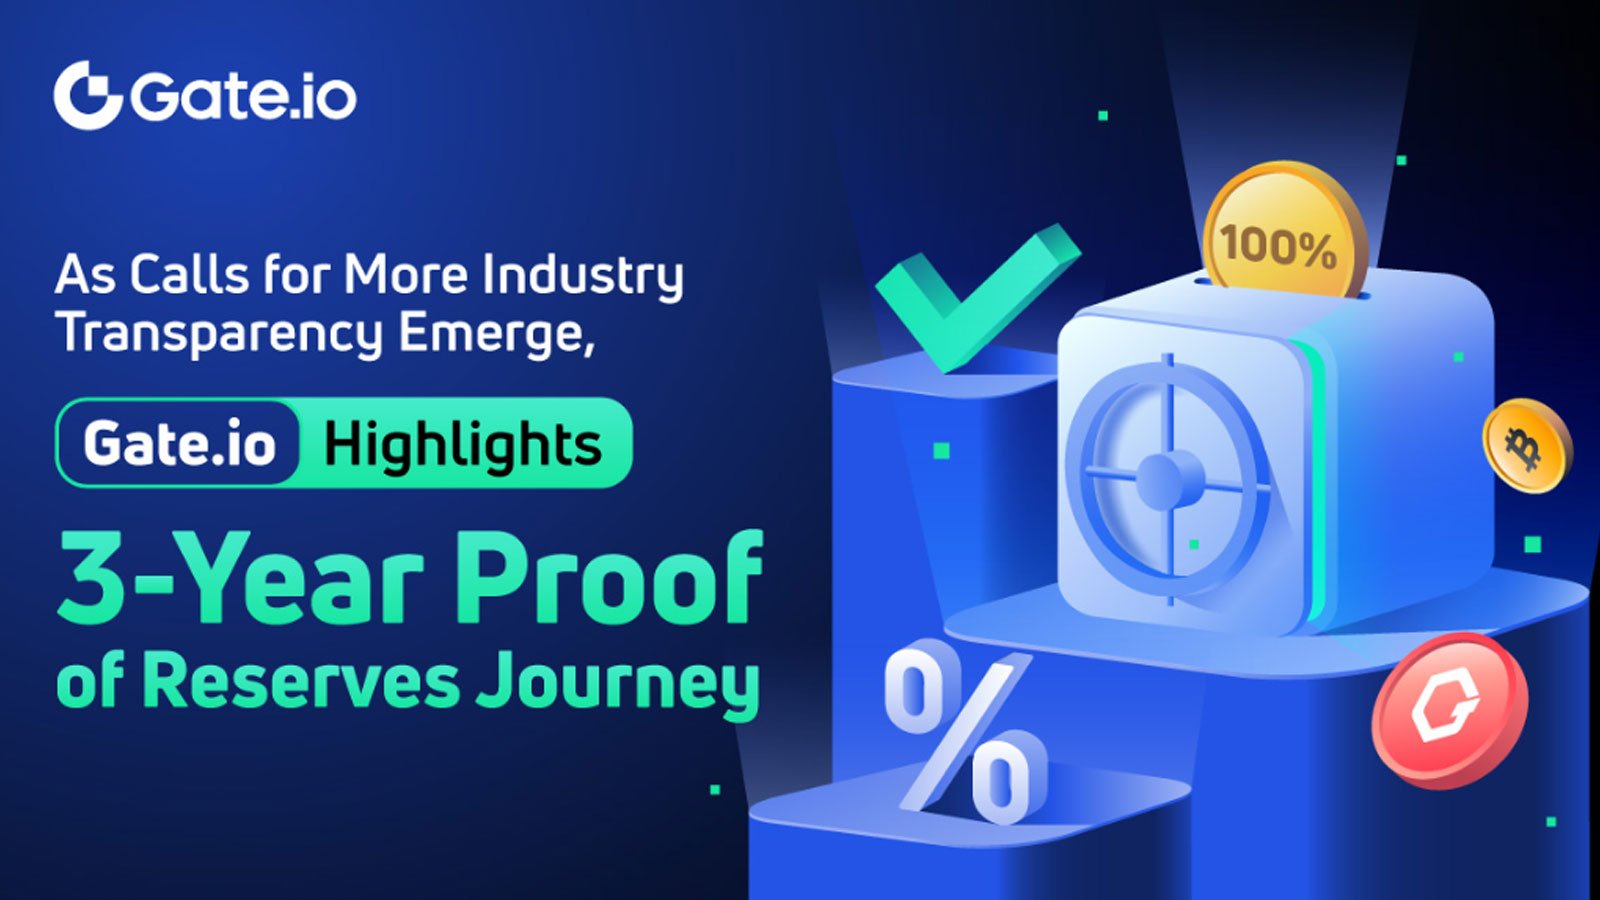 As Industry Calls for More Transparency, Gate.io Highlights its 3-Year Proof of Reserves Journey